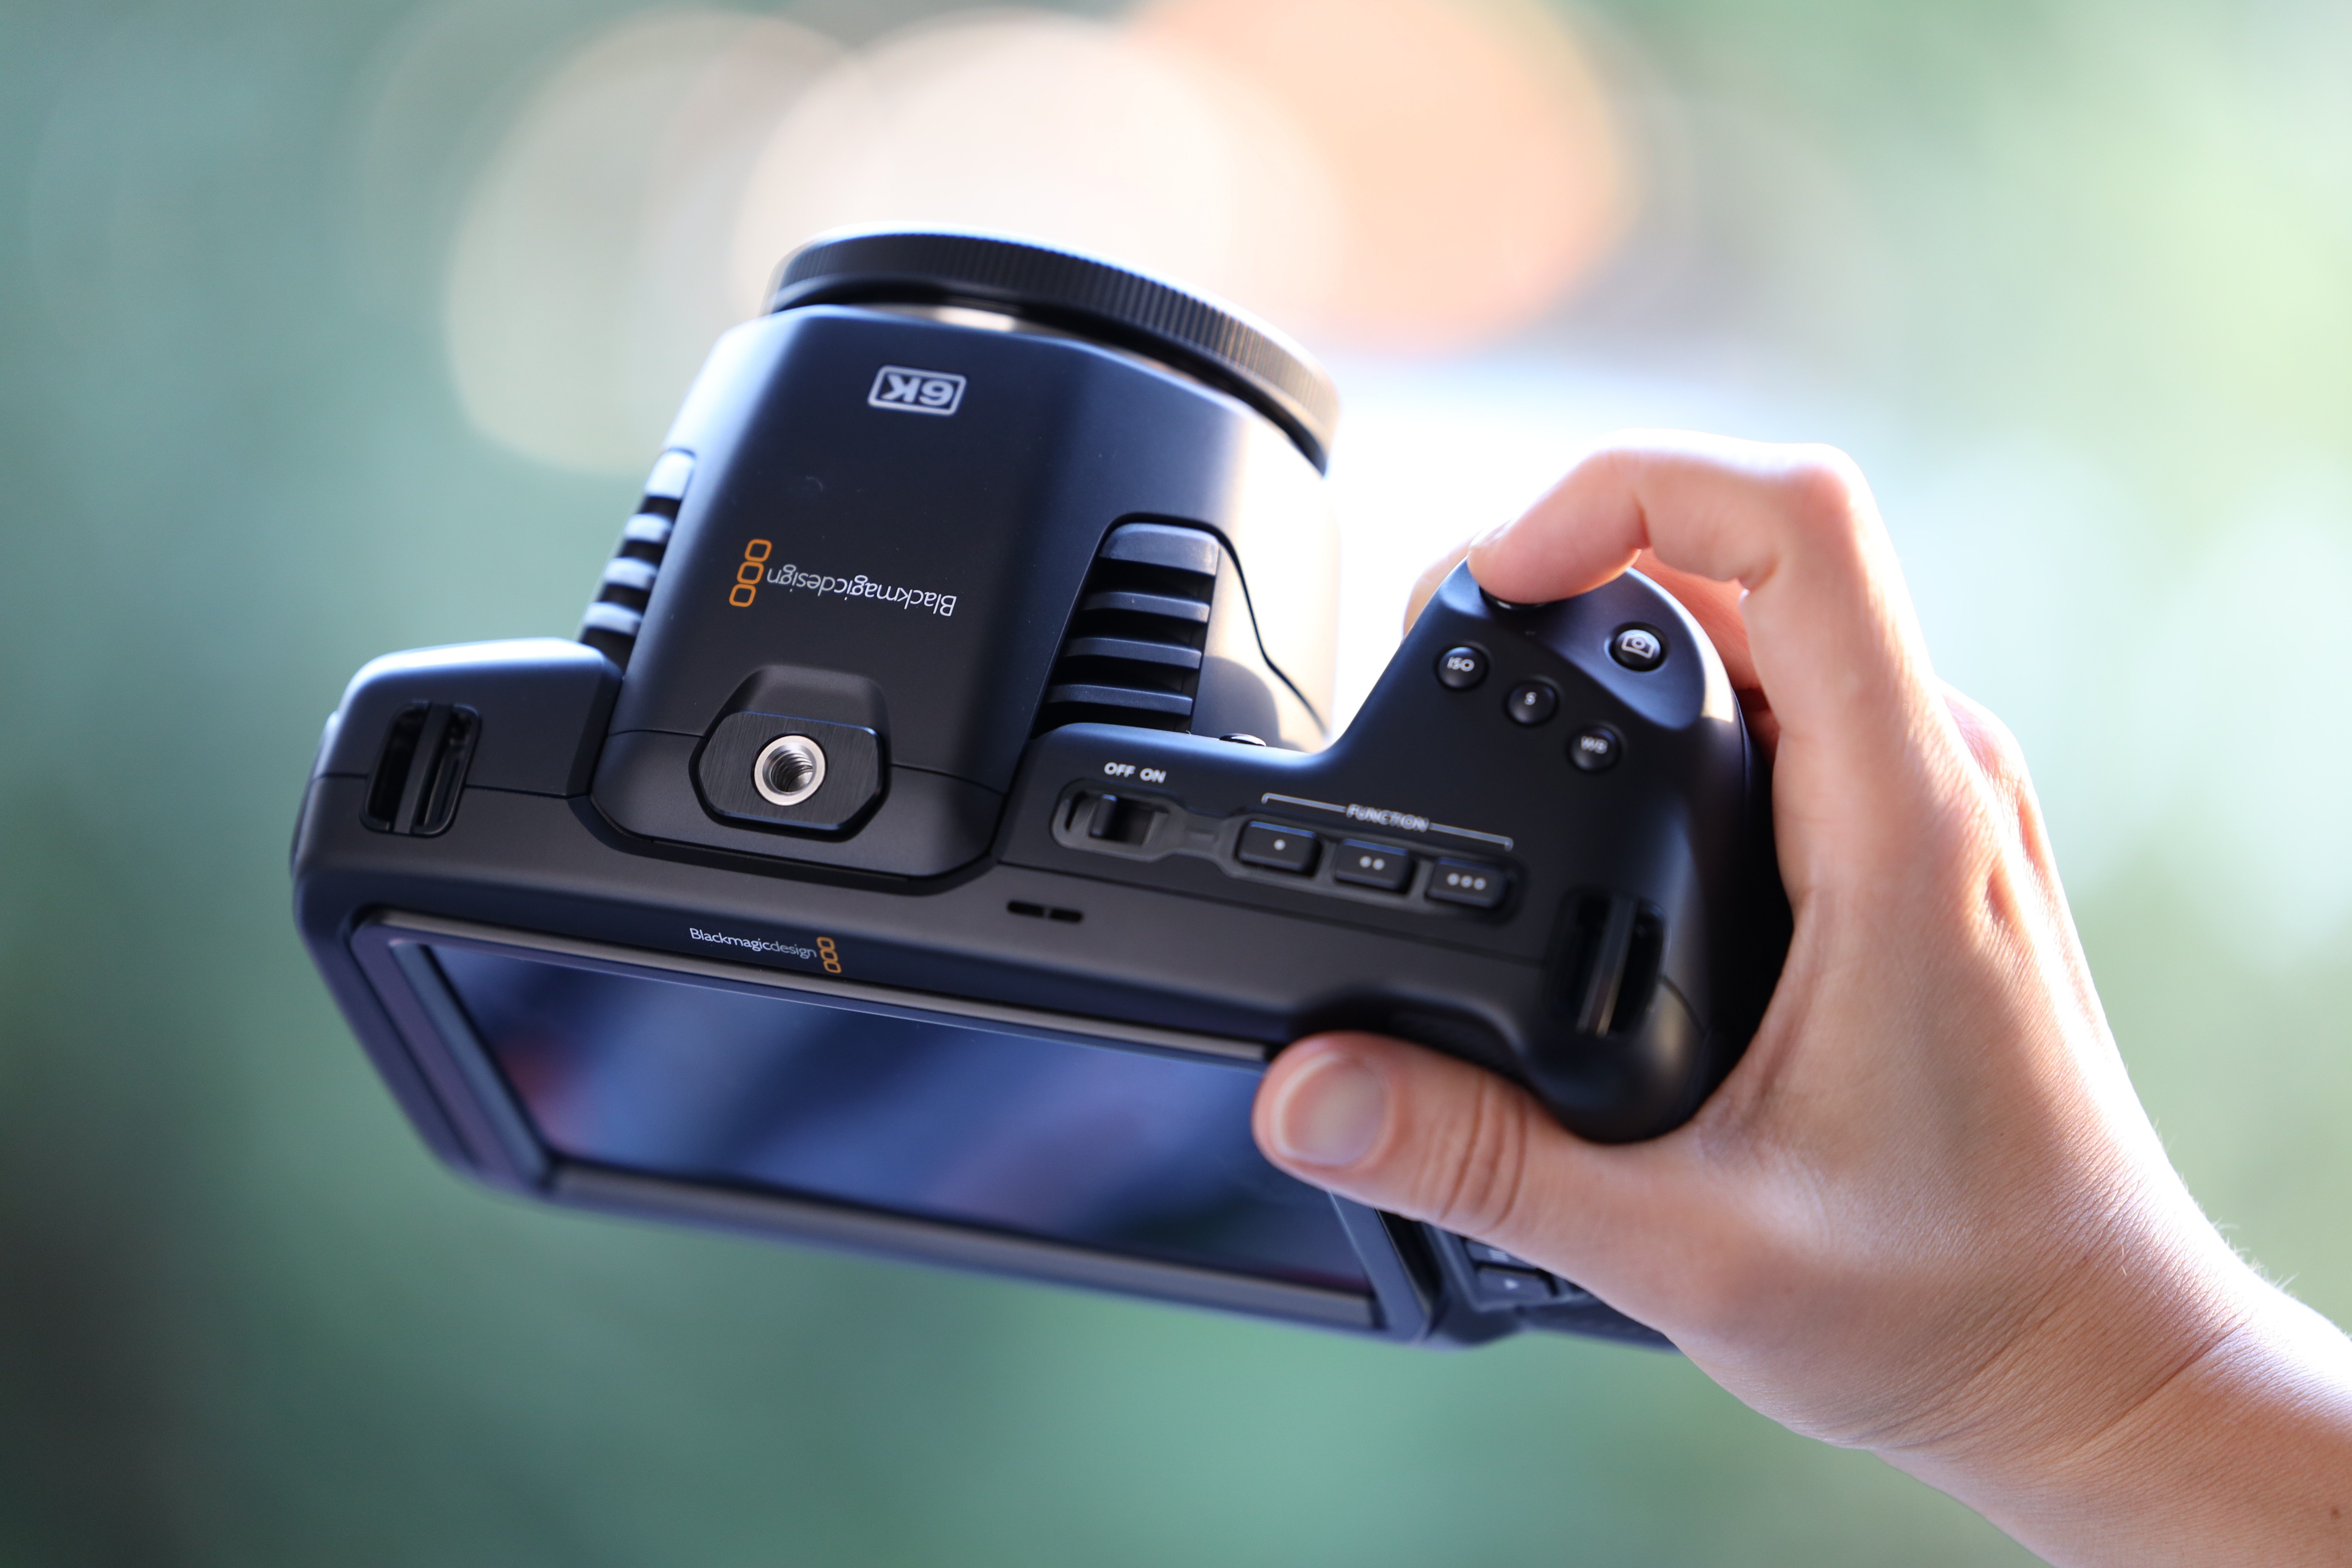 With raw 6K footage for all filmmakers at an entry-level price, the creative possibilities are clearer with the handheld Blackmagic Pocket Cinema Camera 6K. Photo: Derek Ting